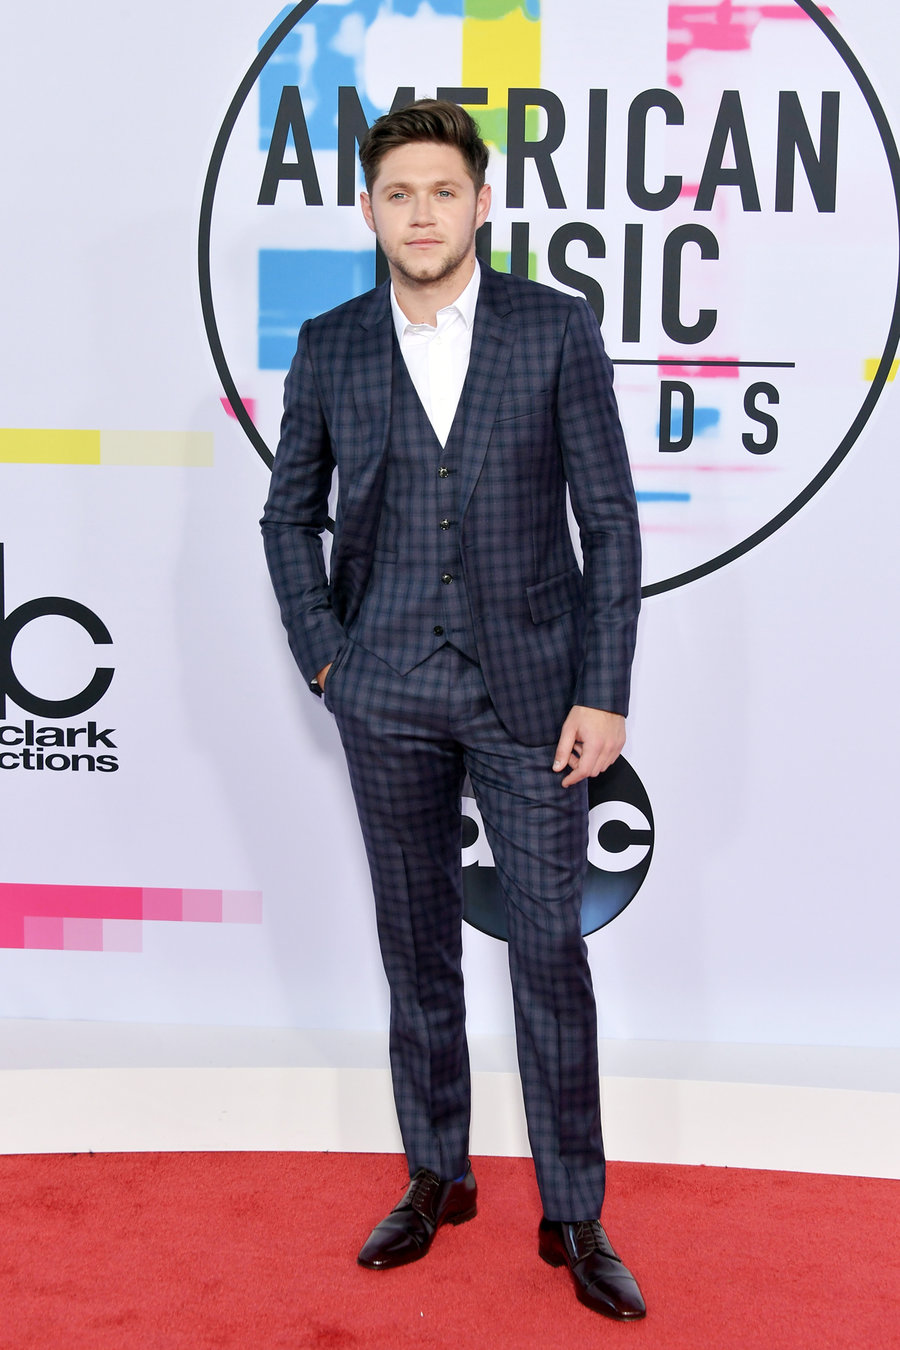 Niall Horan in a Paul Smith suit. Photo by Neilson Barnard for Getty Images